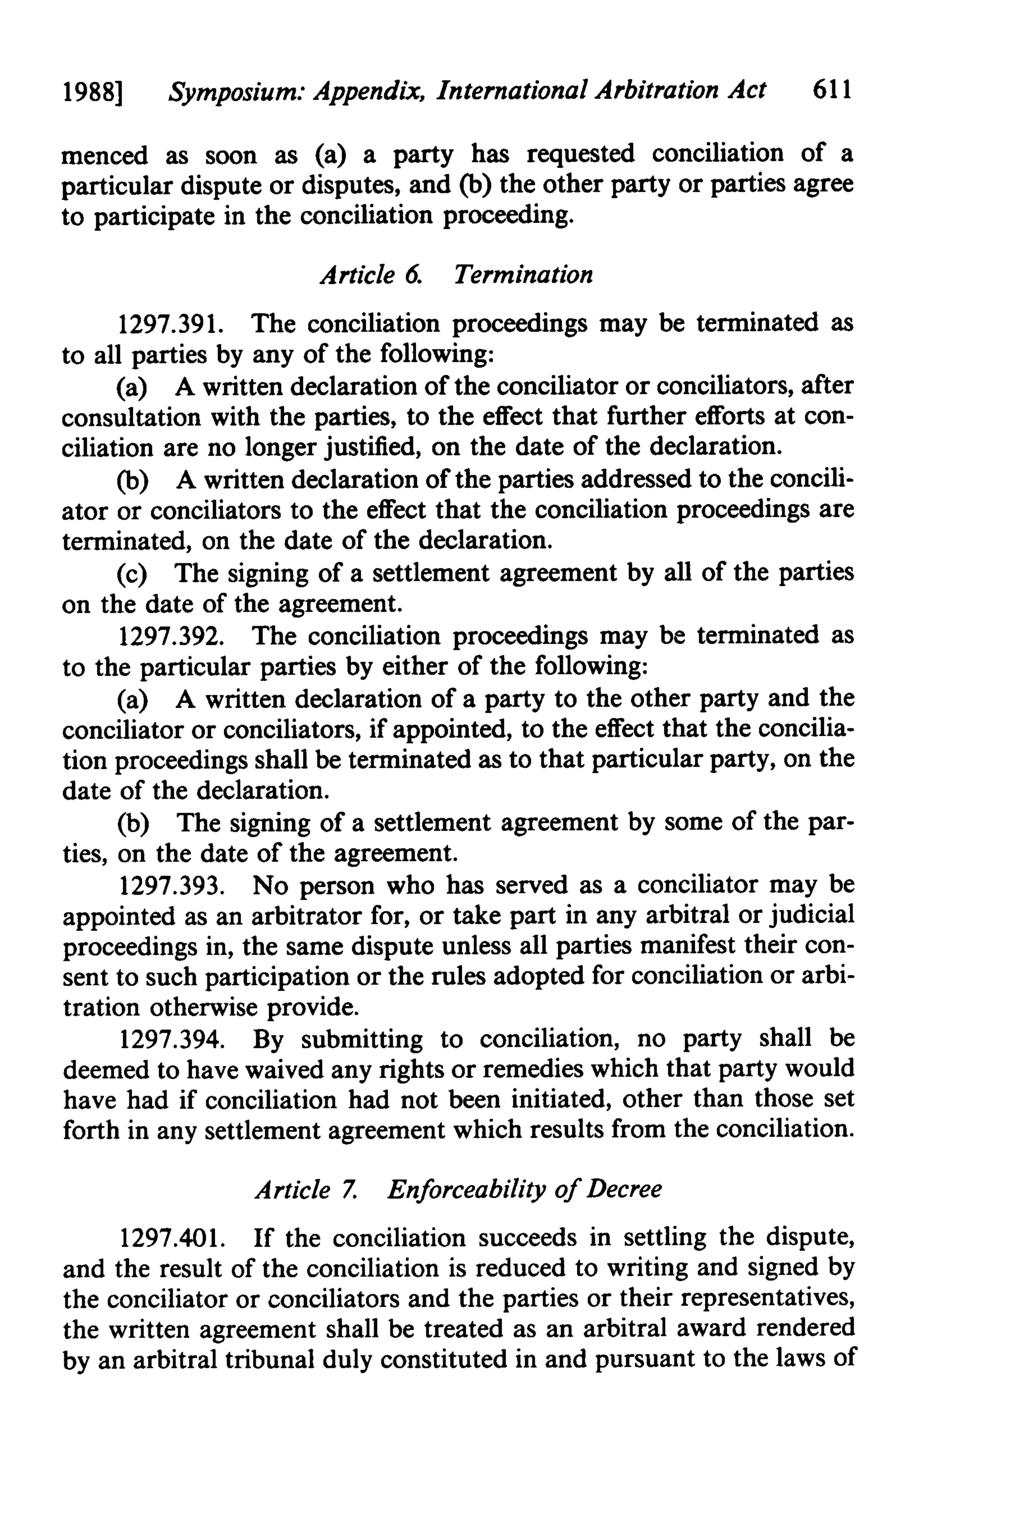 1988] Symposium: Appendix, International Arbitration Act 611 menced as soon as (a) a party has requested conciliation of a particular dispute or disputes, and (b) the other party or parties agree to